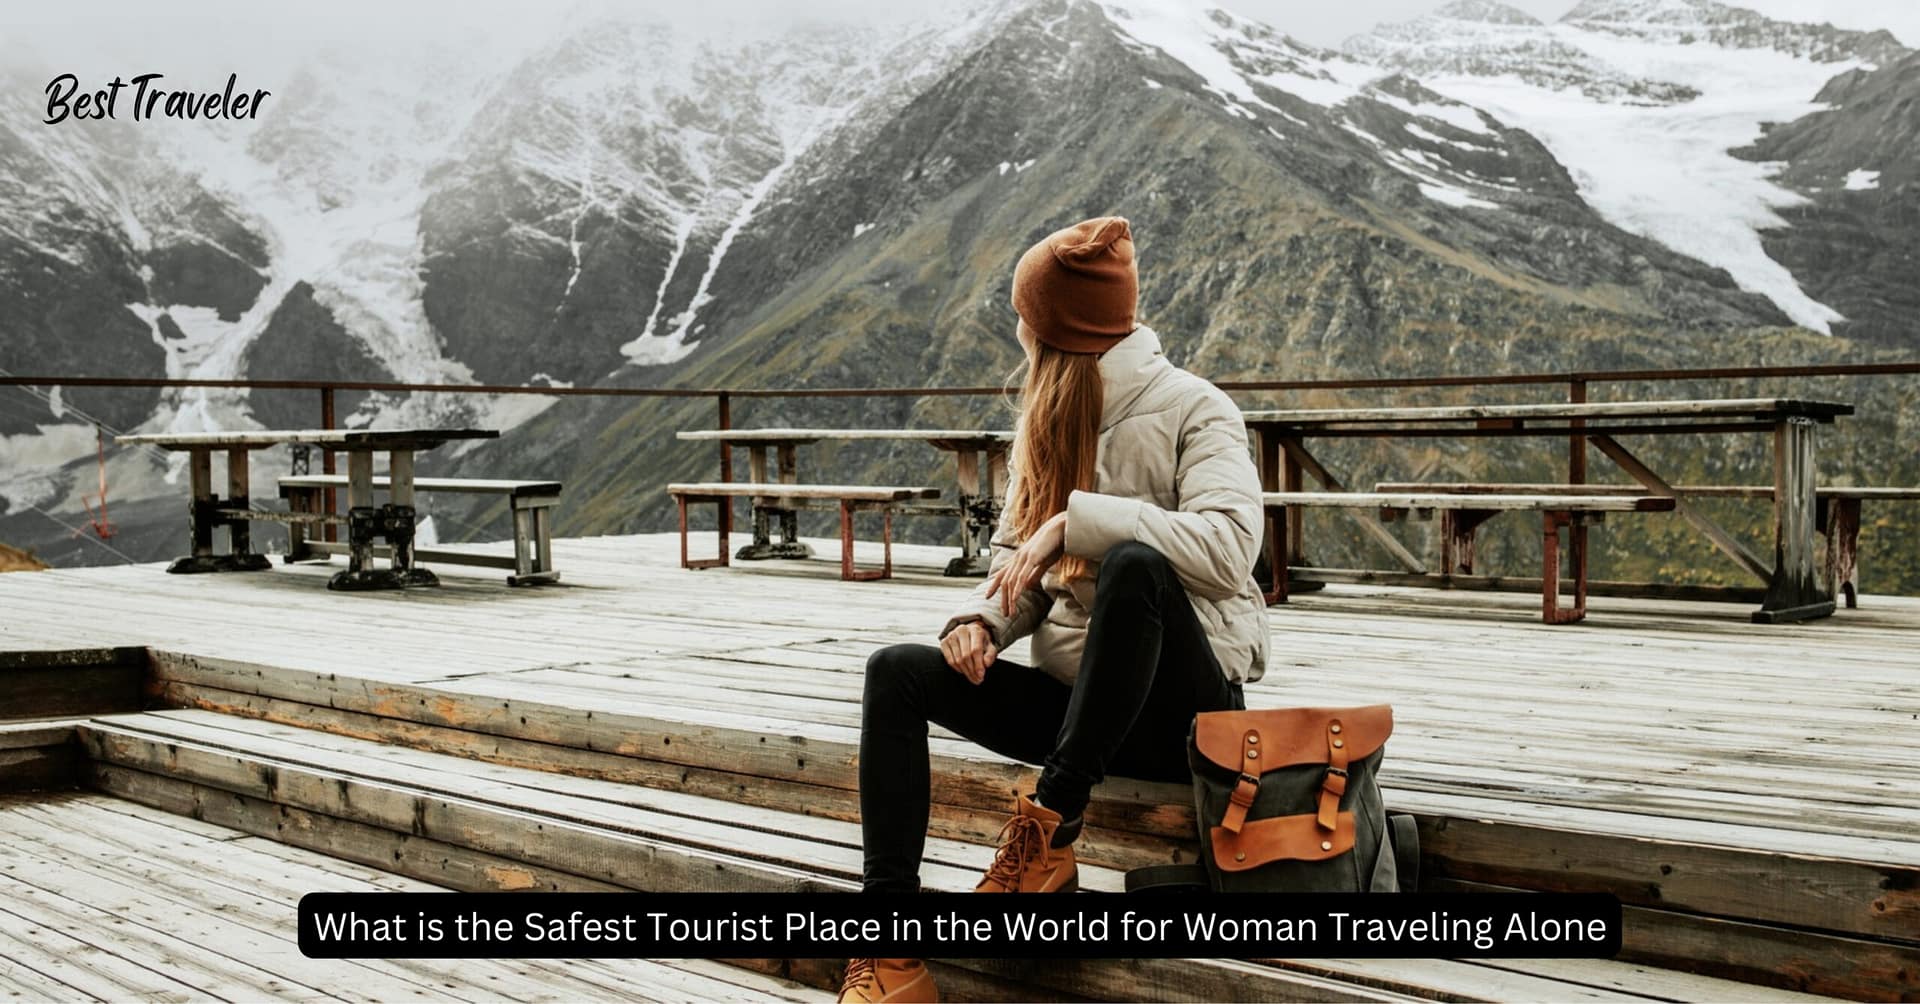 What is the Safest Tourist Place in the World for Woman Traveling Alone?